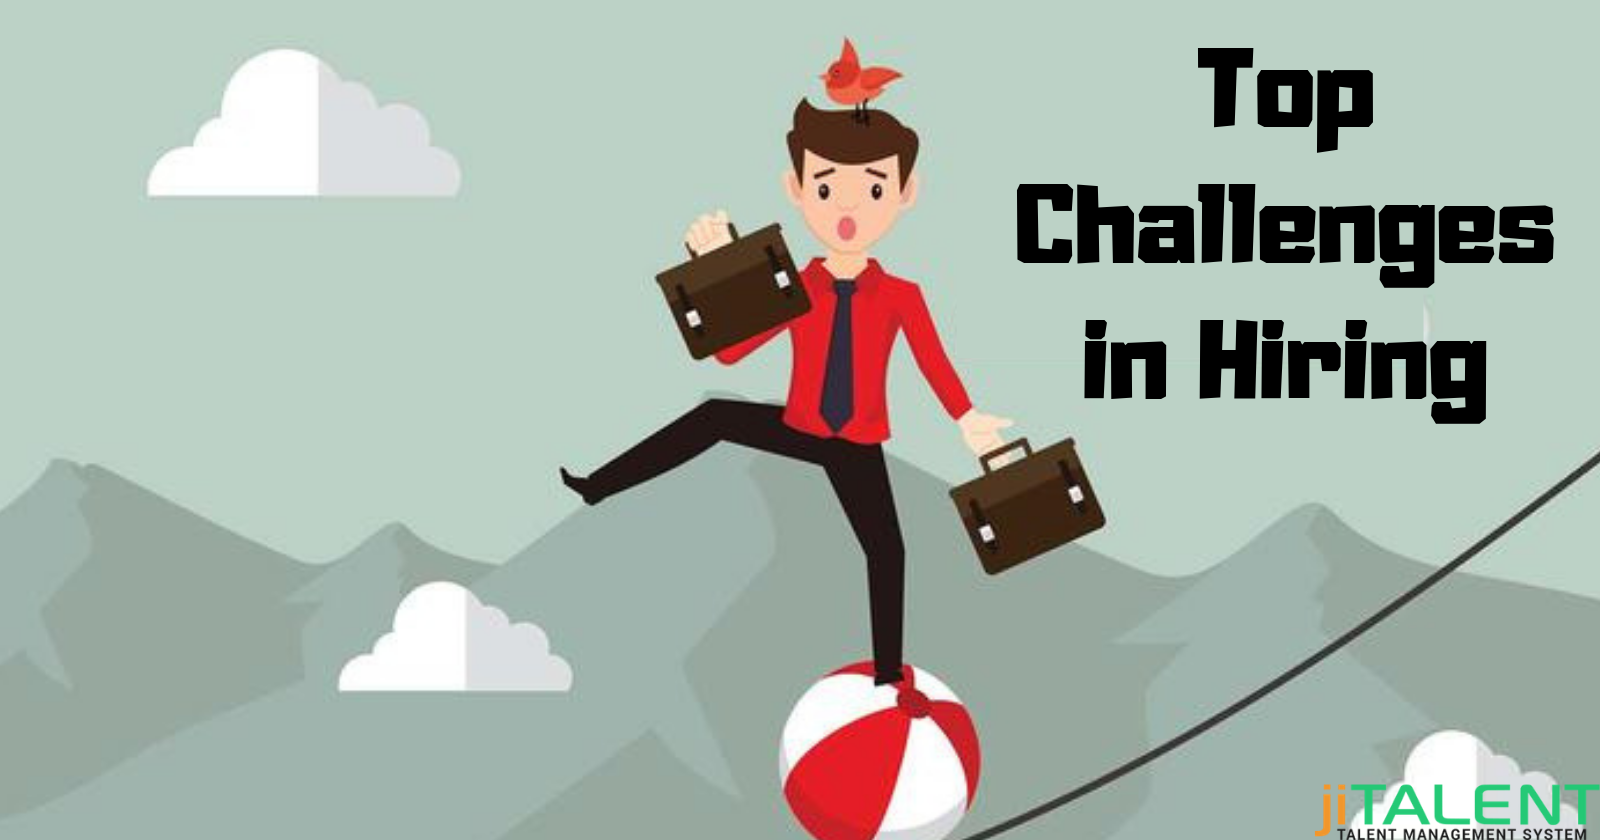 Top Challenges Of Talent Management System